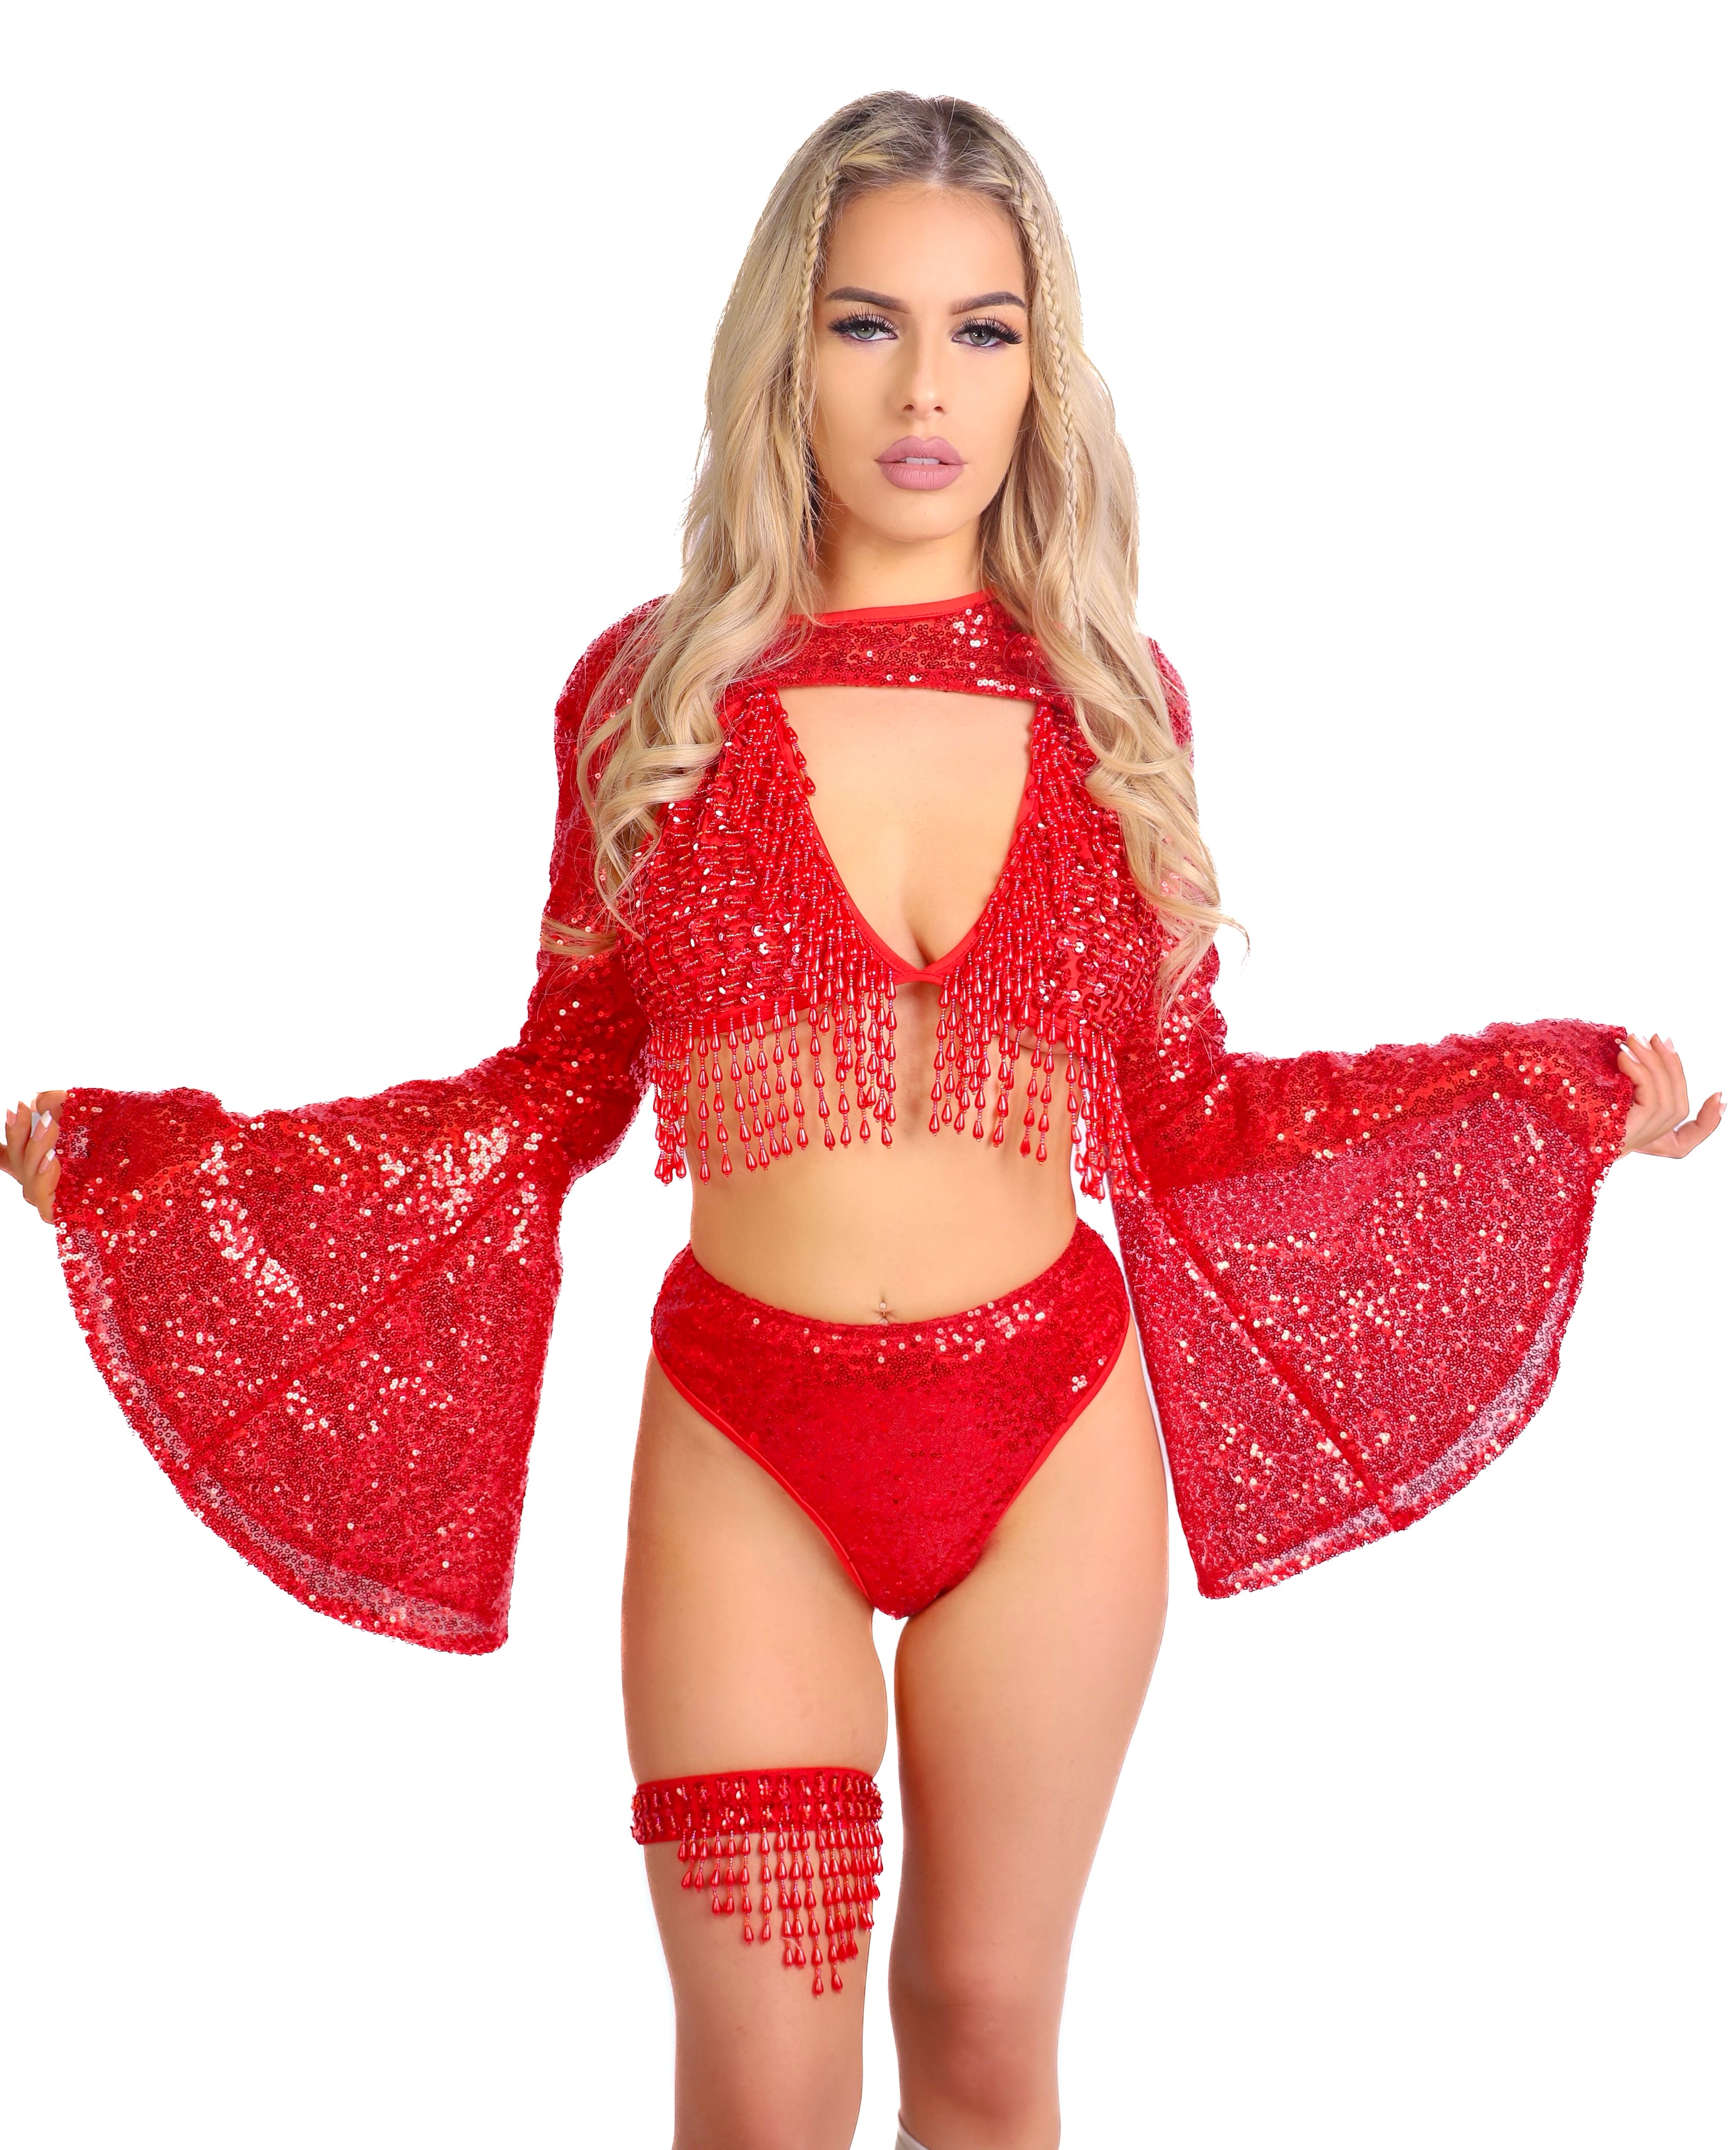 FULL OUTFIT- Ruby Goddess (4 pcs)